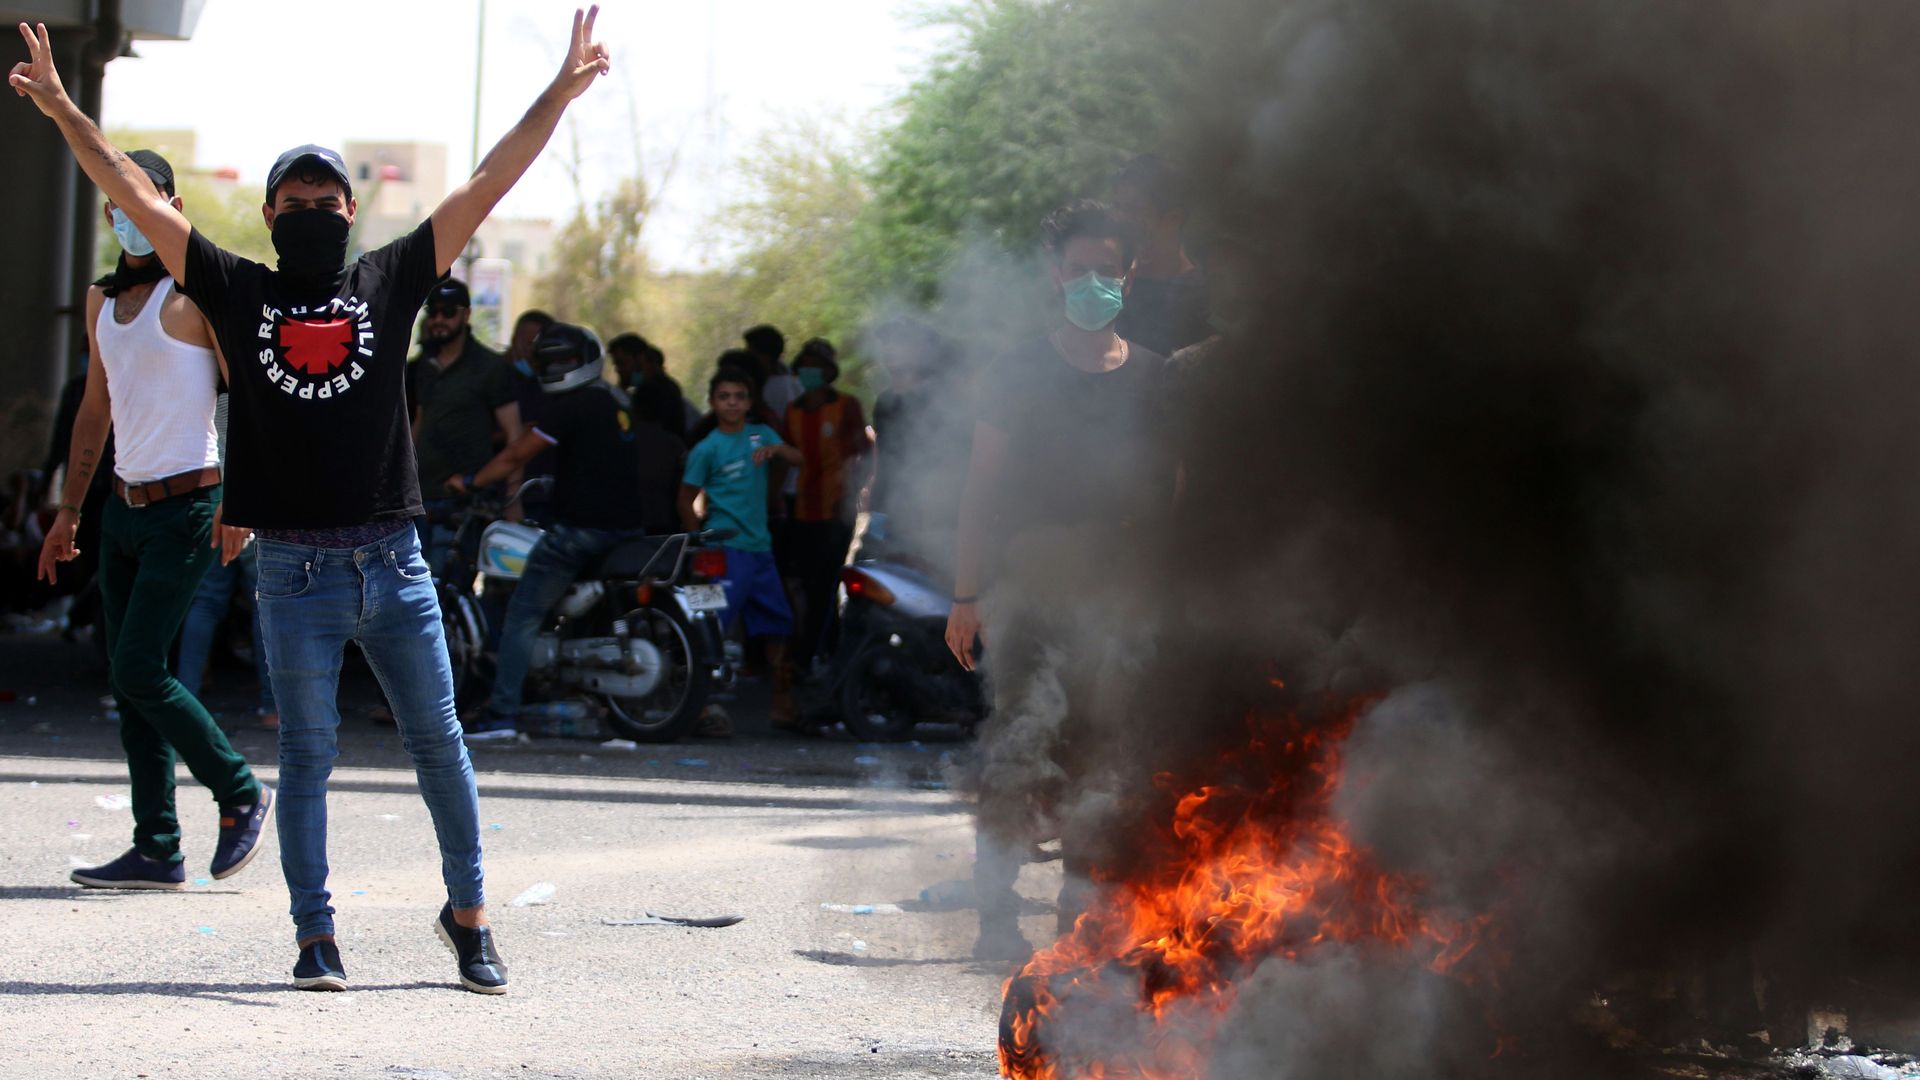 A protestor stands next to a burning tire, with his hands raised gesturing the peace sign. 